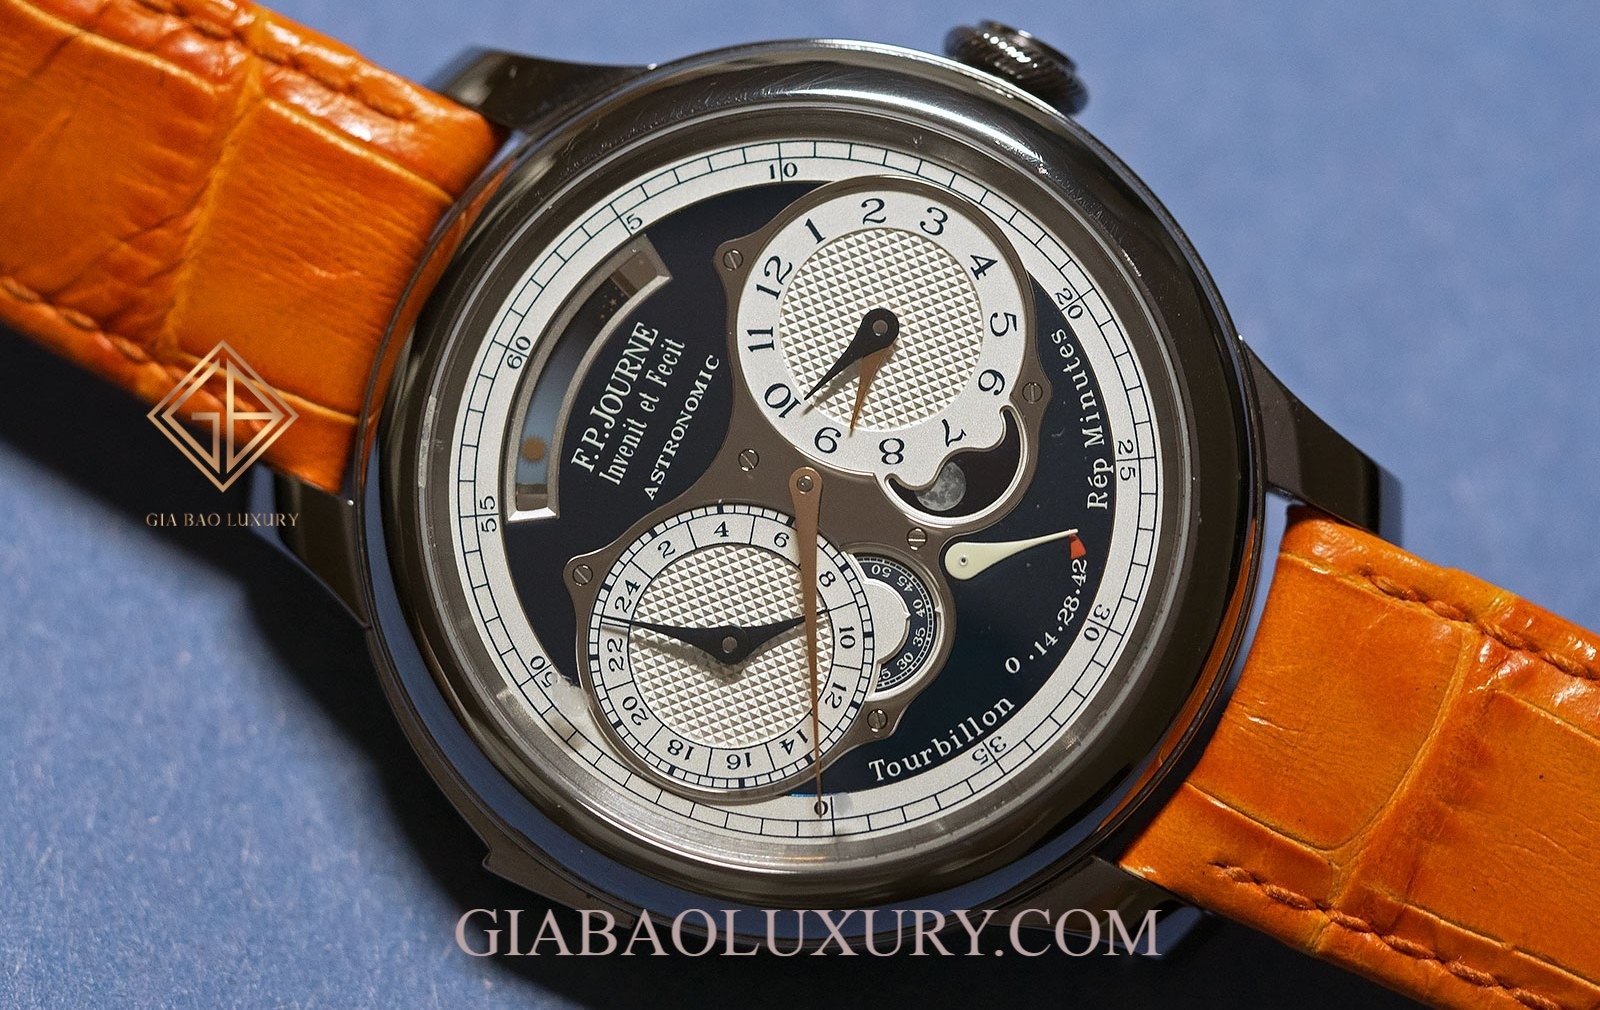 Review đồng hồ F.P.Journe Astronomic Blue tại Only Watch 2019